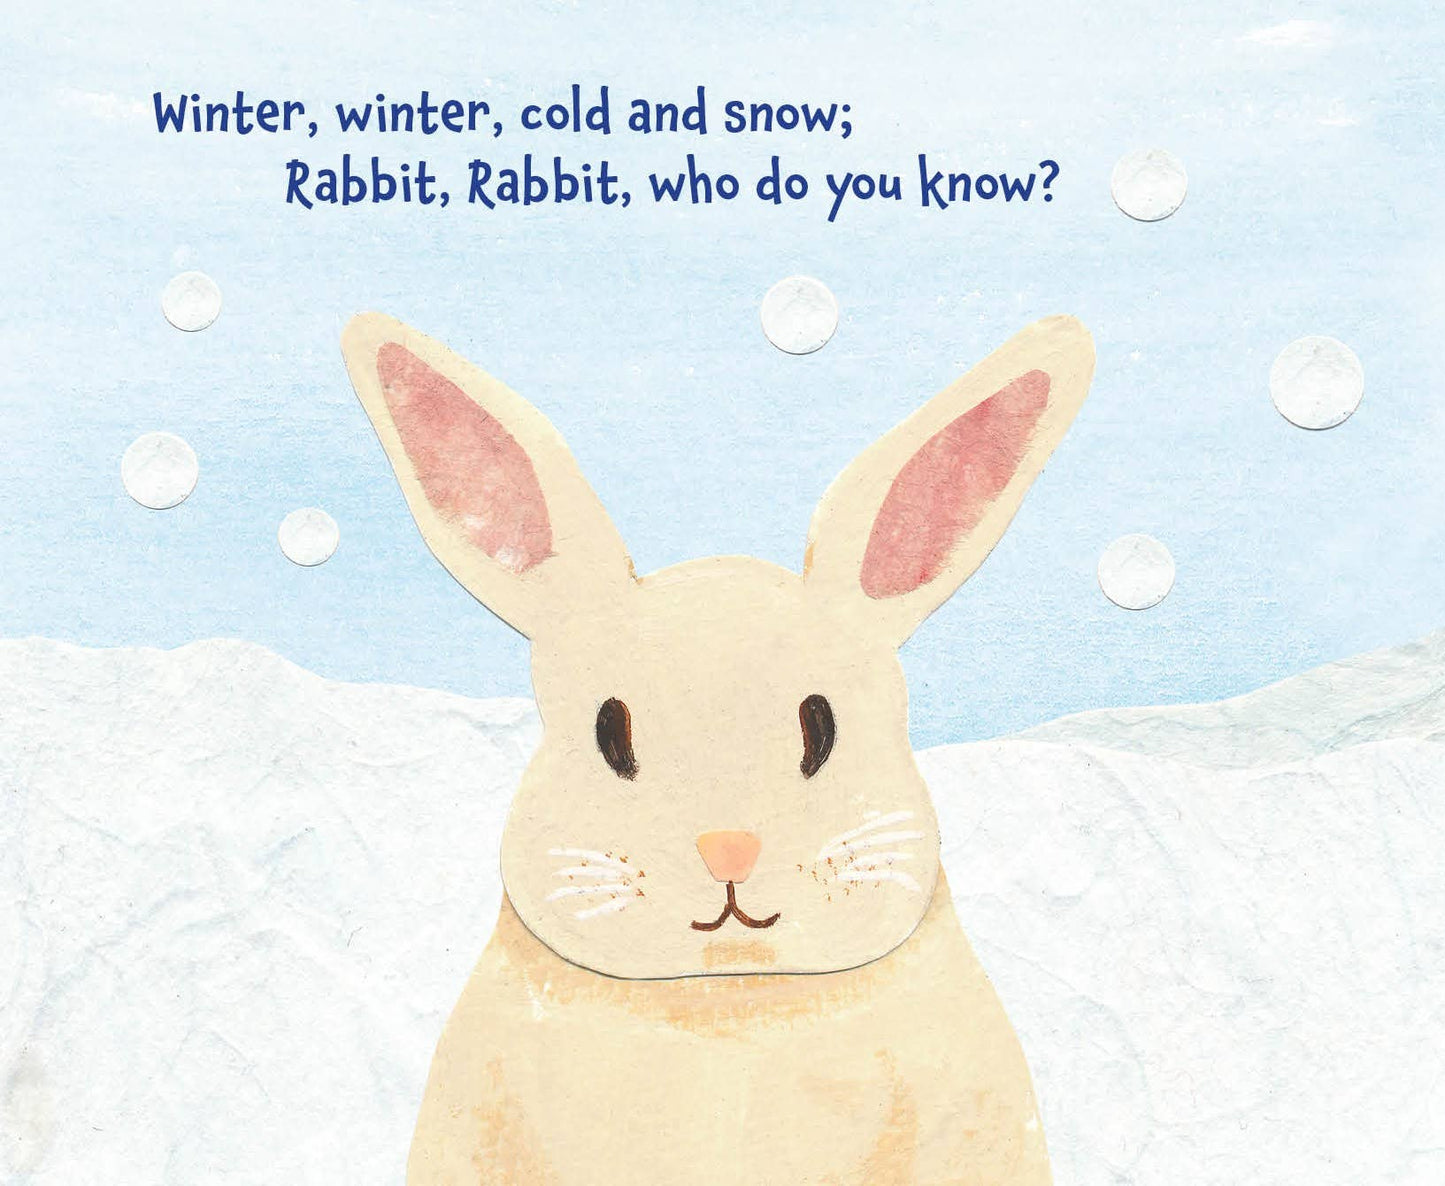 Winter, Winter, Cold and Snow picture book